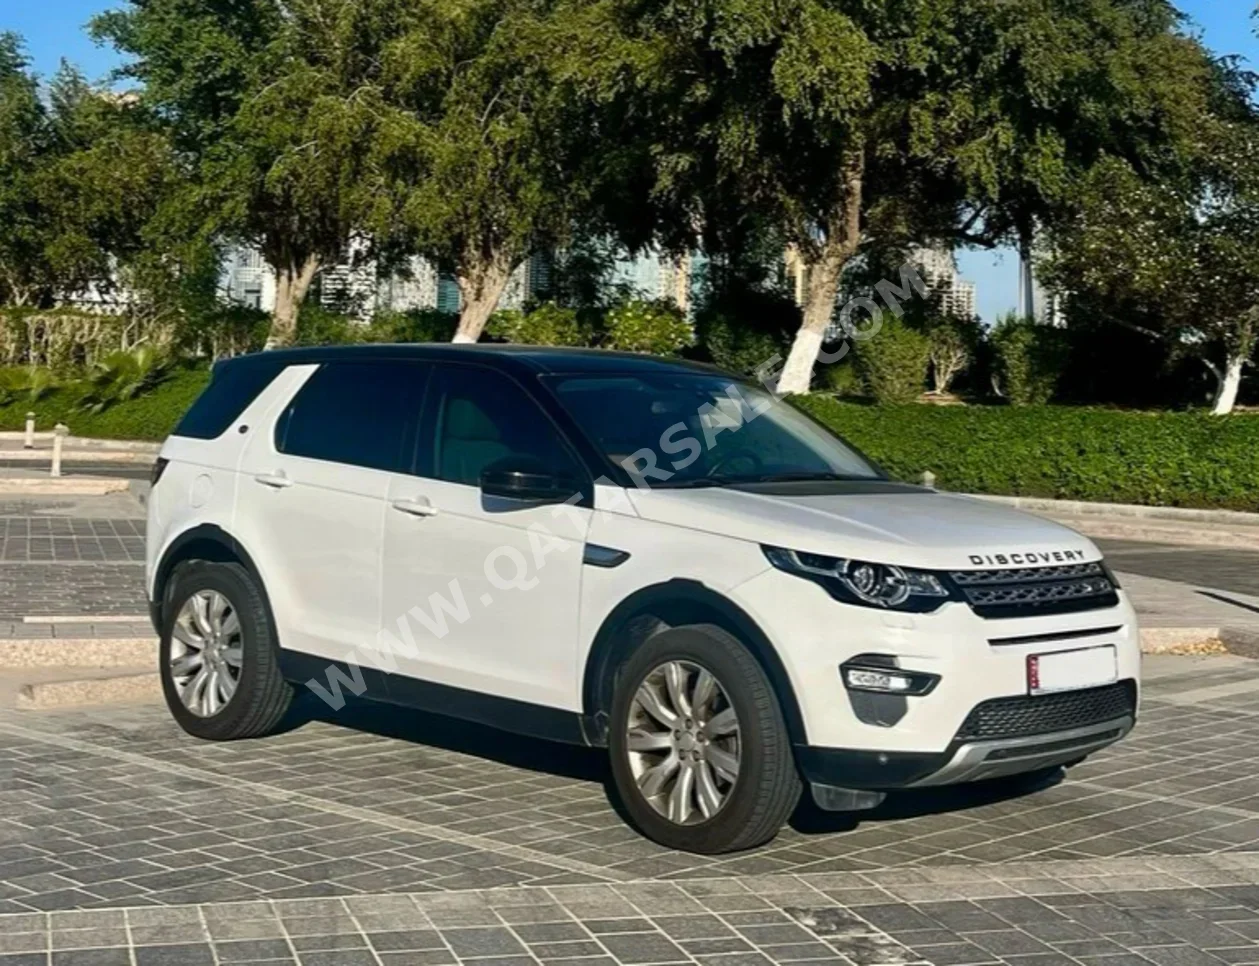 Land Rover  Discovery  Sport HSE  2015  Automatic  80,000 Km  4 Cylinder  Four Wheel Drive (4WD)  SUV  White  With Warranty